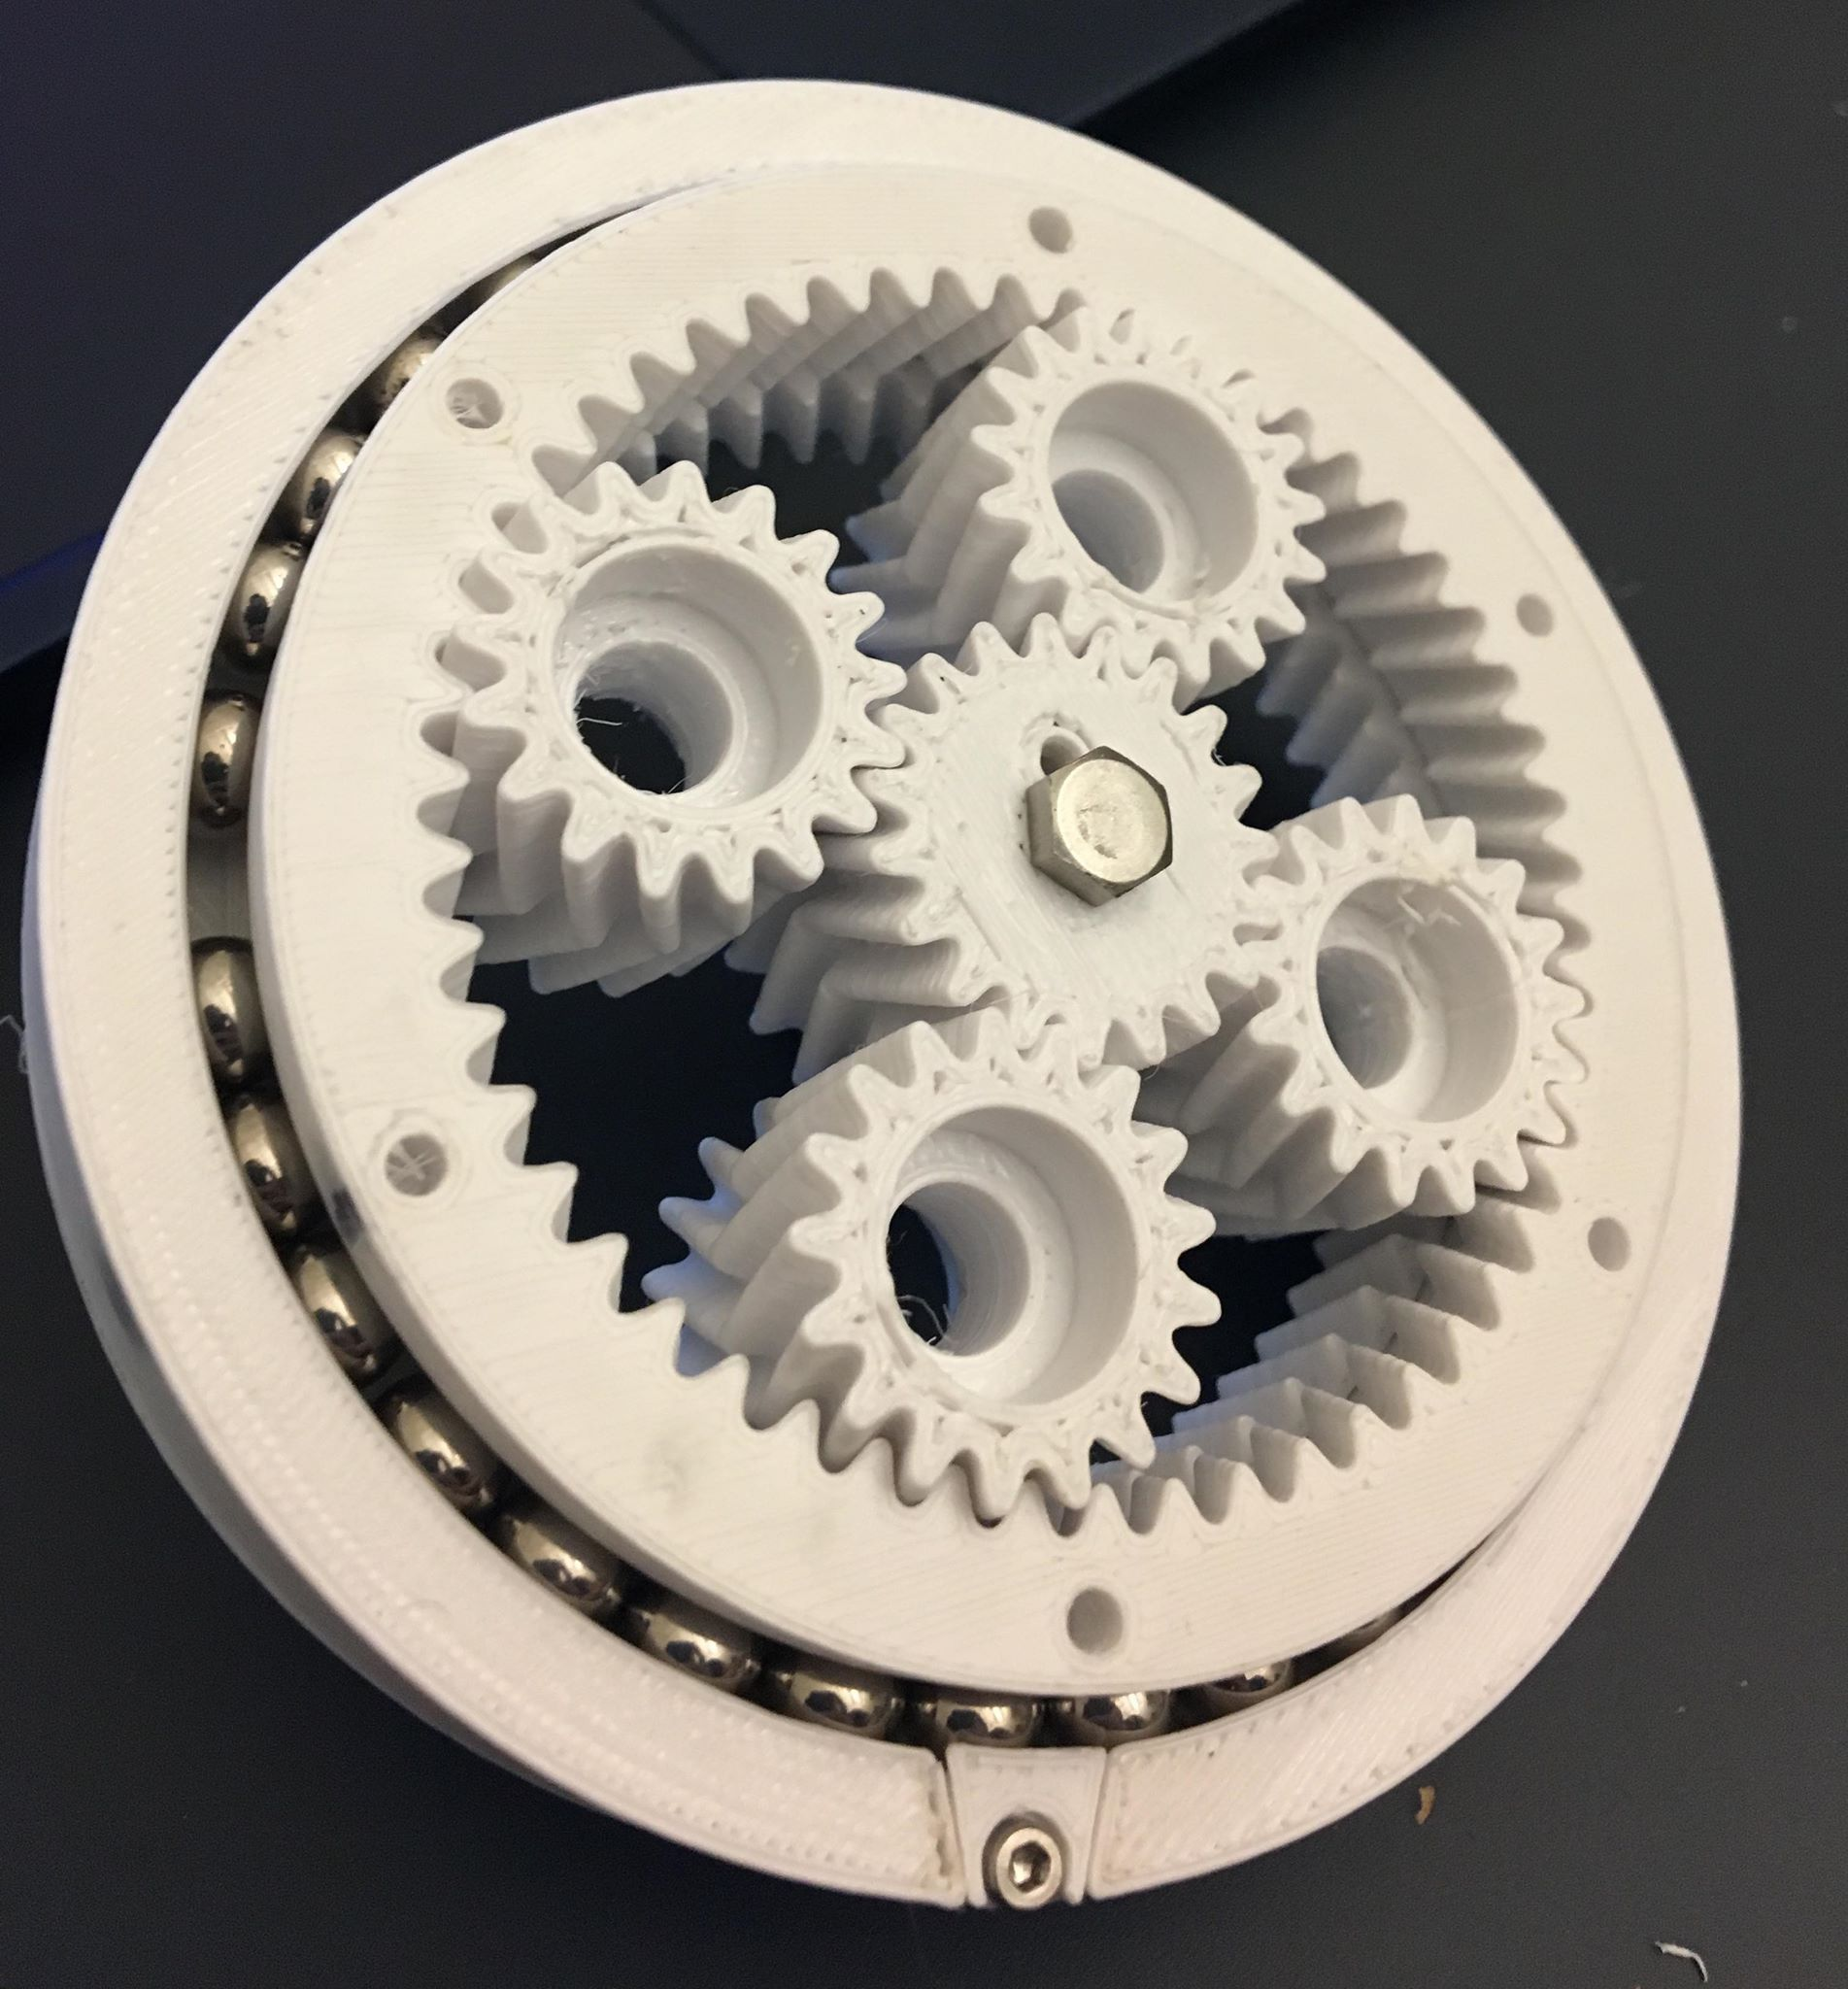 3D printed epicyclic gearbox